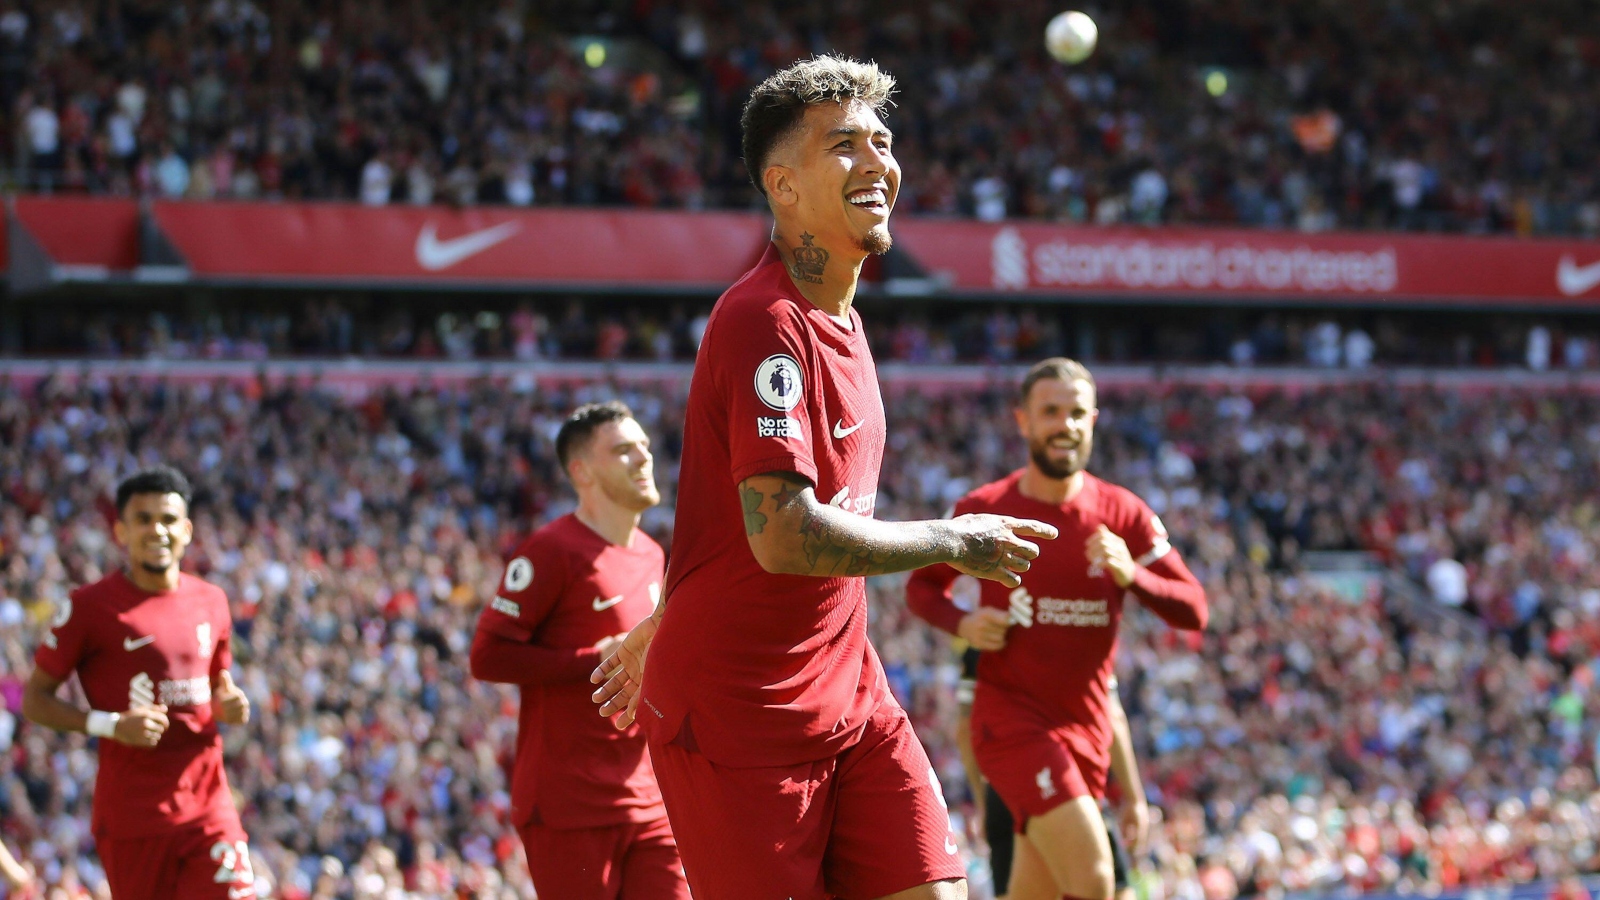 The five Liverpool players that could leave the club on a free transfer in 2023: Firmino, Keita